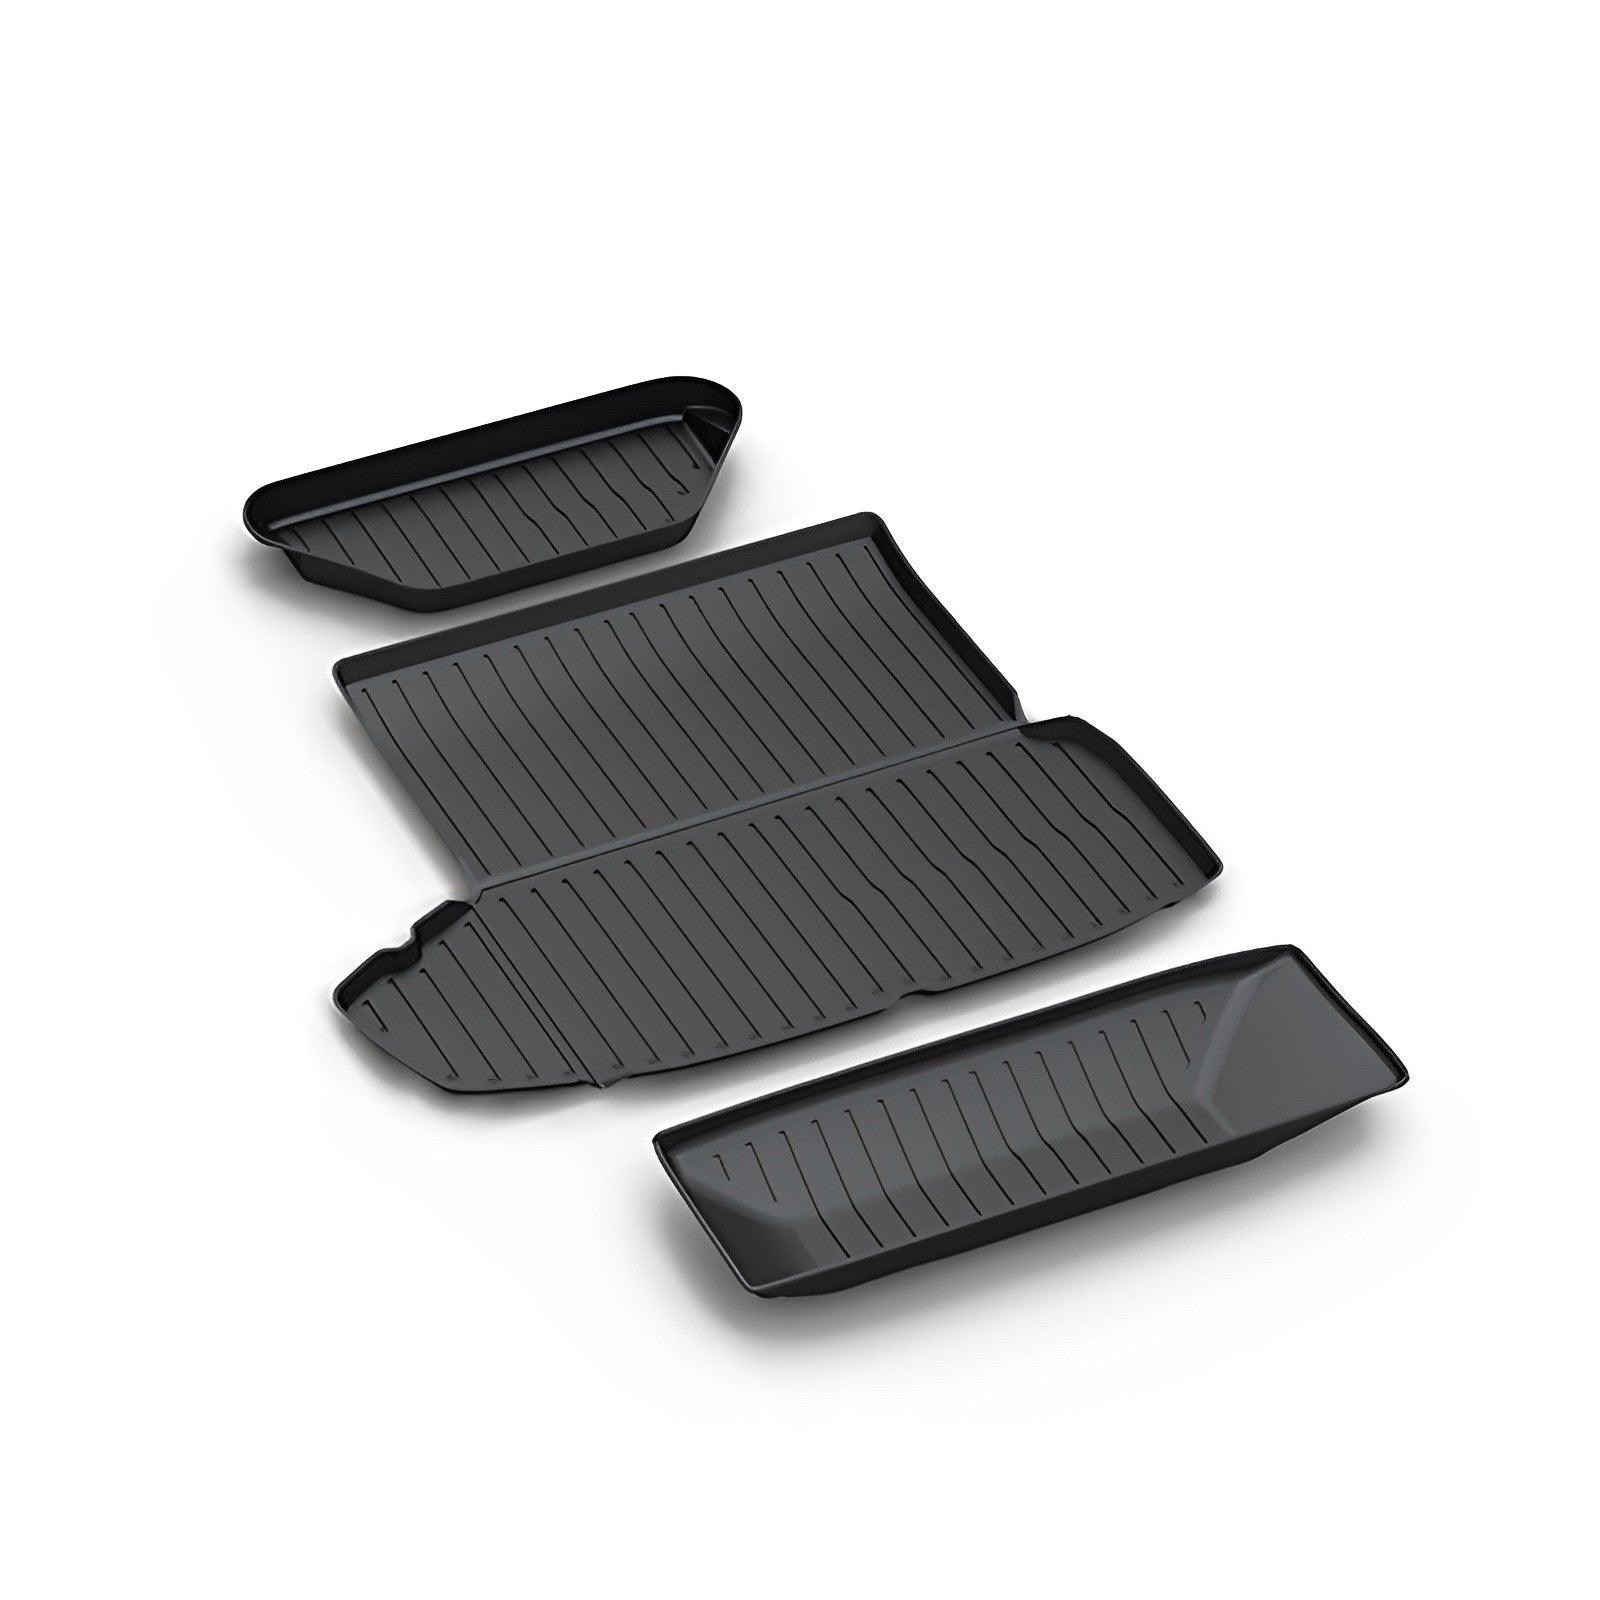 2021-2024 Model S All Weather Floor Mat / Trunk Mat / Cargo Liner For Long Range and Plaid